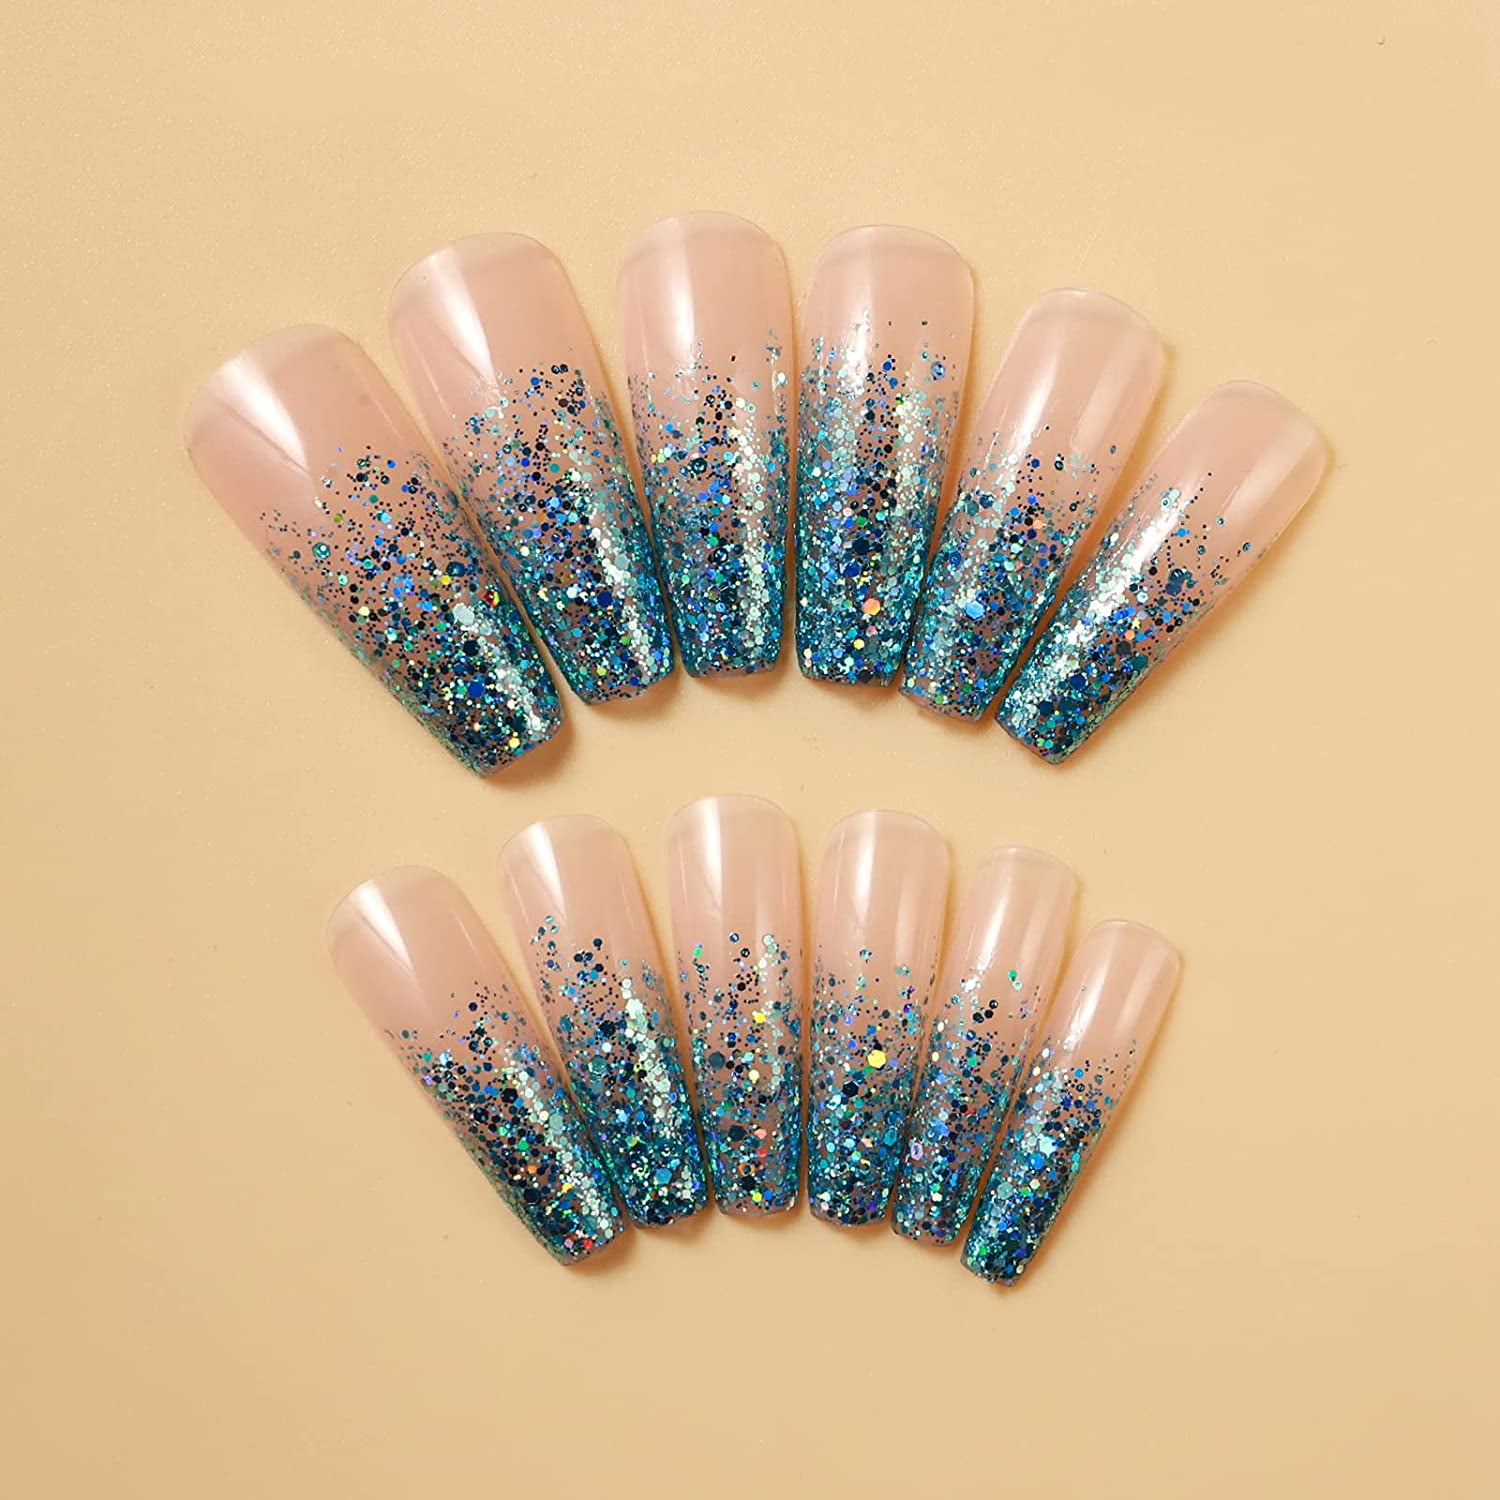 Optage komme udkast 24PCS Fake Nails with Ombre Glitter Design, Press on Nails Long Coffin  Luxury Nails, Acrylic Nails Artificial French Tip for Women/Daily/Party( glitter blue) - Walmart.com